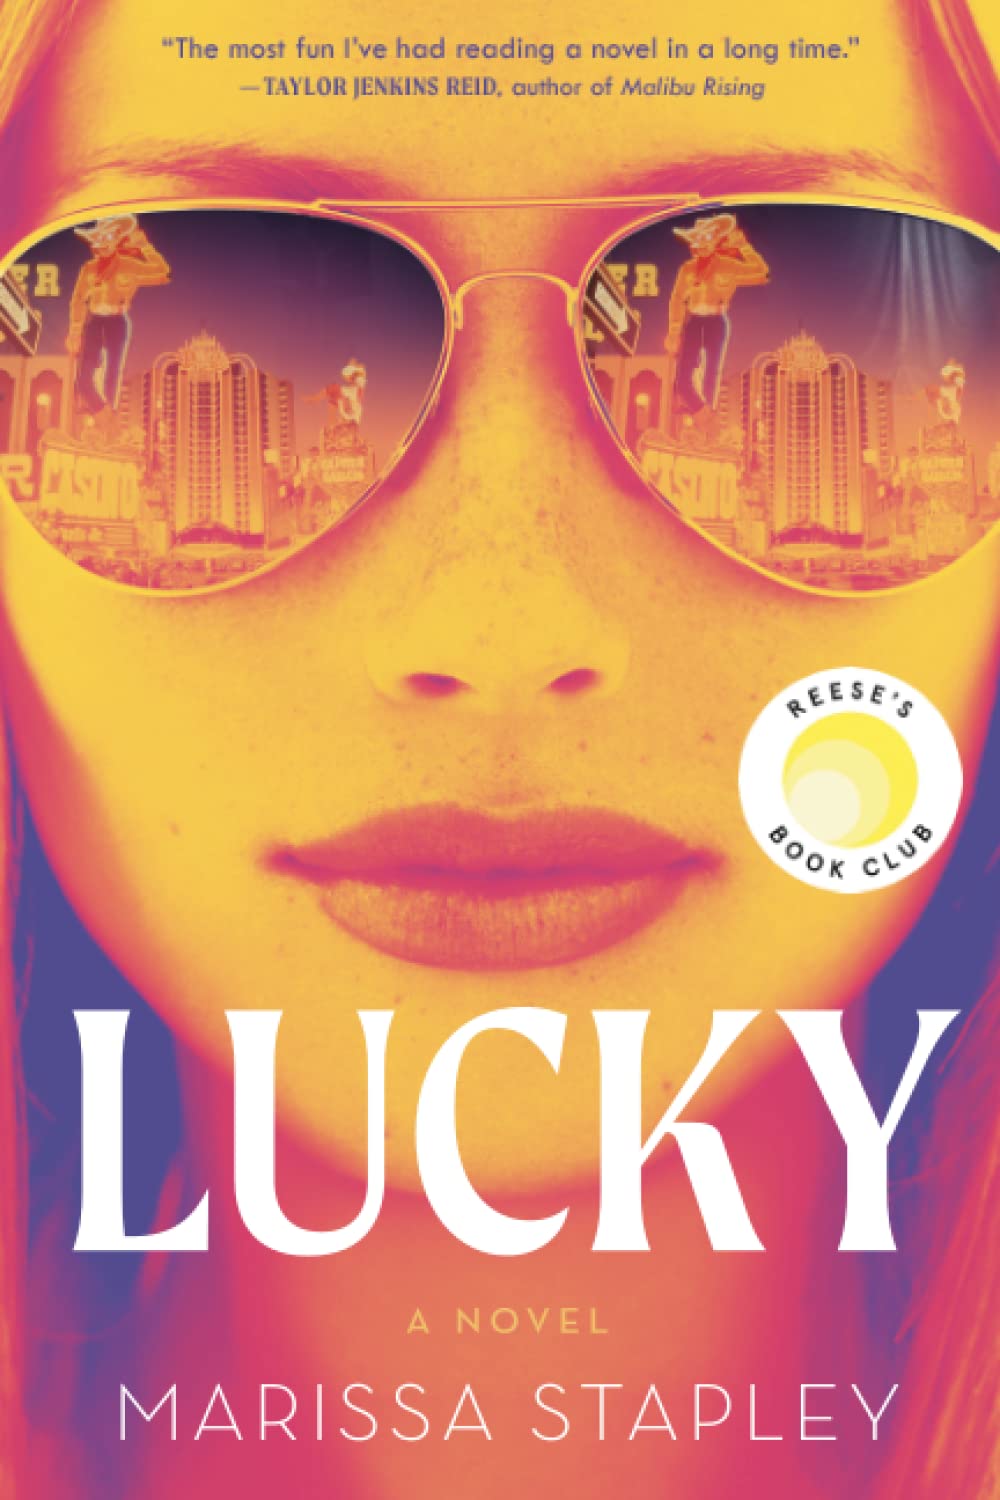 Image for "Lucky"